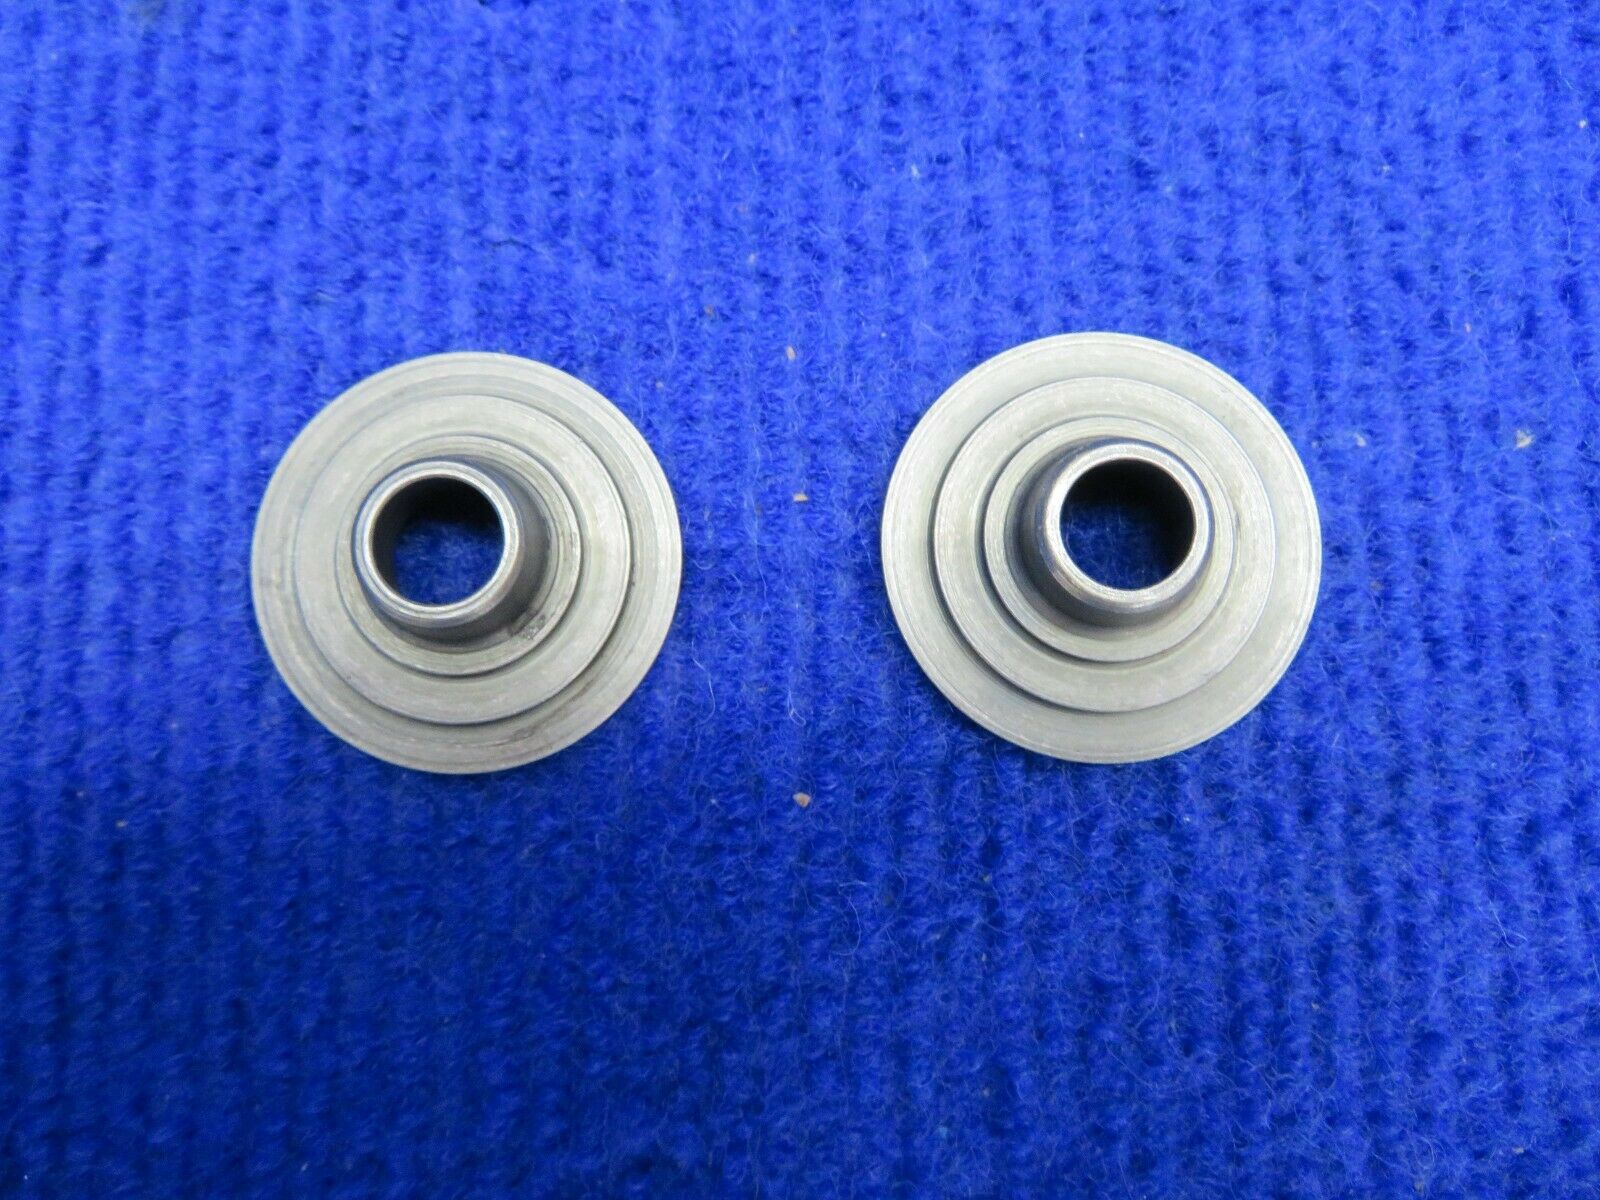 Continental Valve Spring Seat Retainer P/N 625961 LOT OF 2 NOS (0222-730)